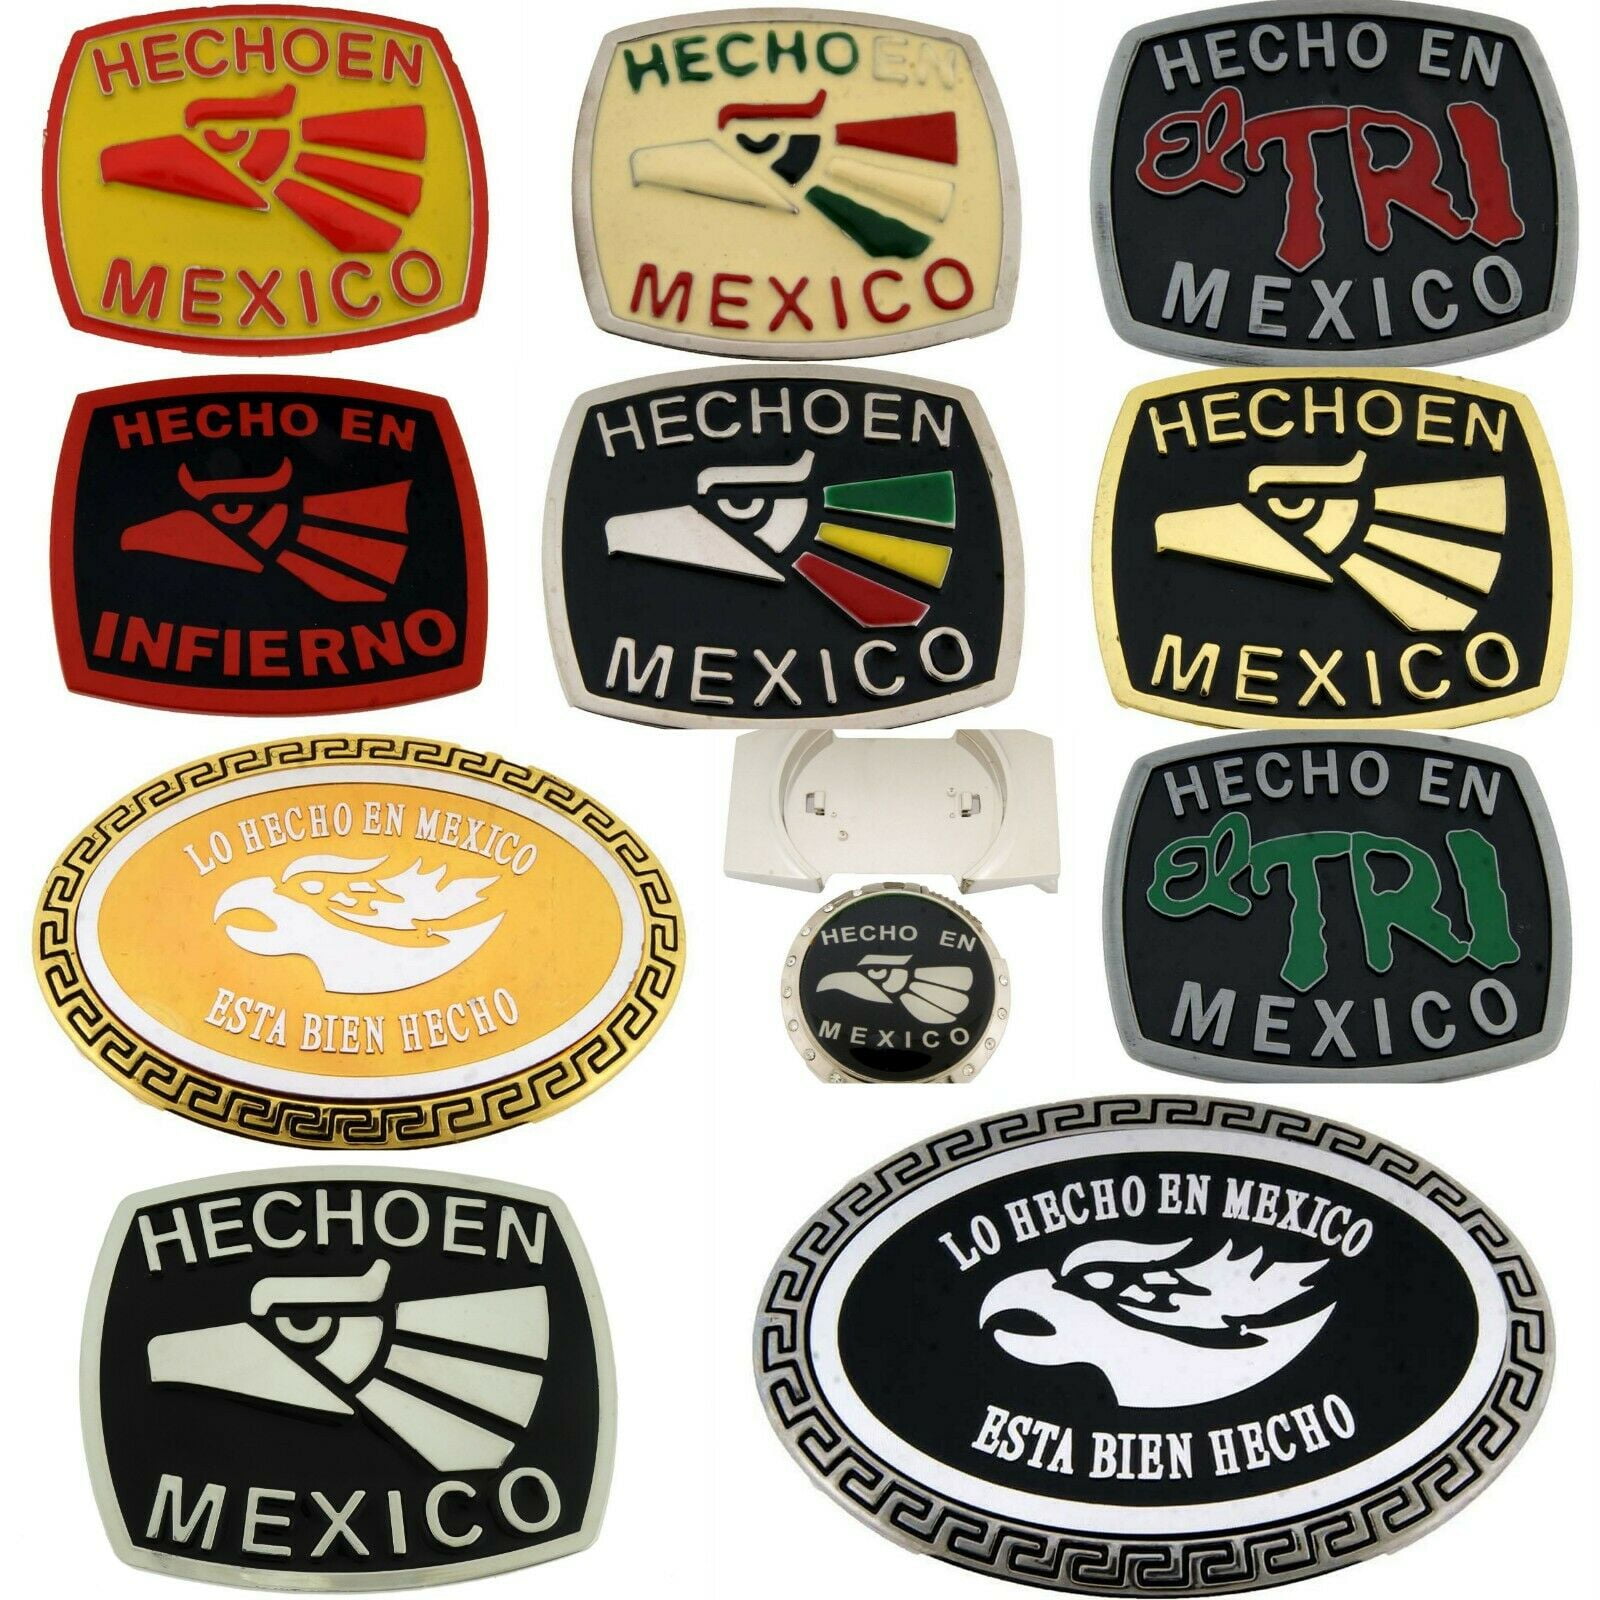 Details about   6 Pcs Belt Buckles Lot wholesale closeout overstock Mexico Mexican Western Flags 